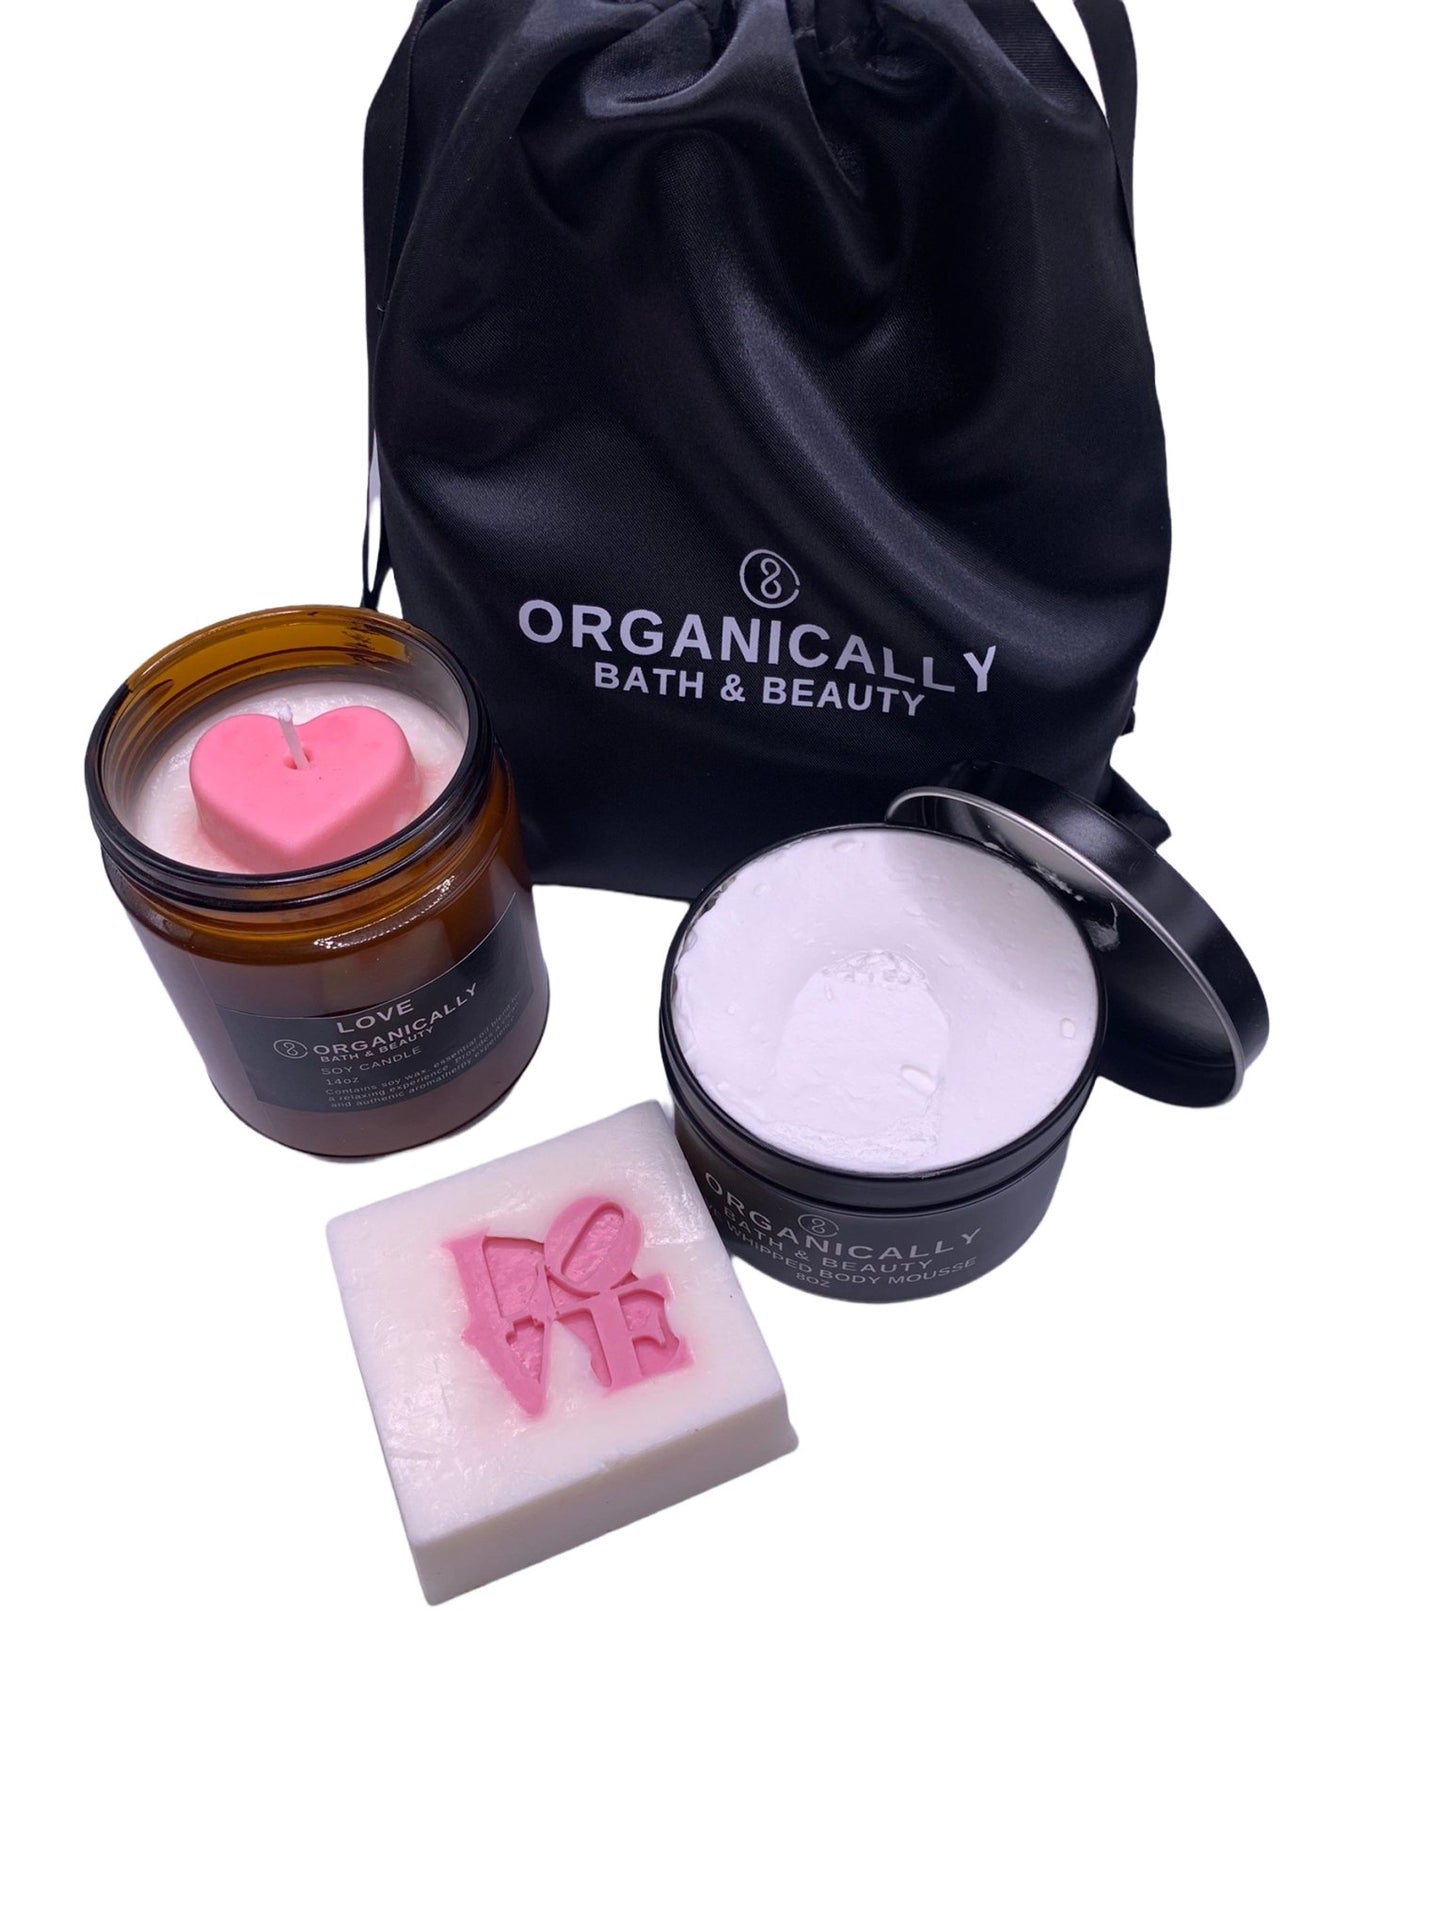 LOVE Collection Gift Set - Organically Bath & Beauty